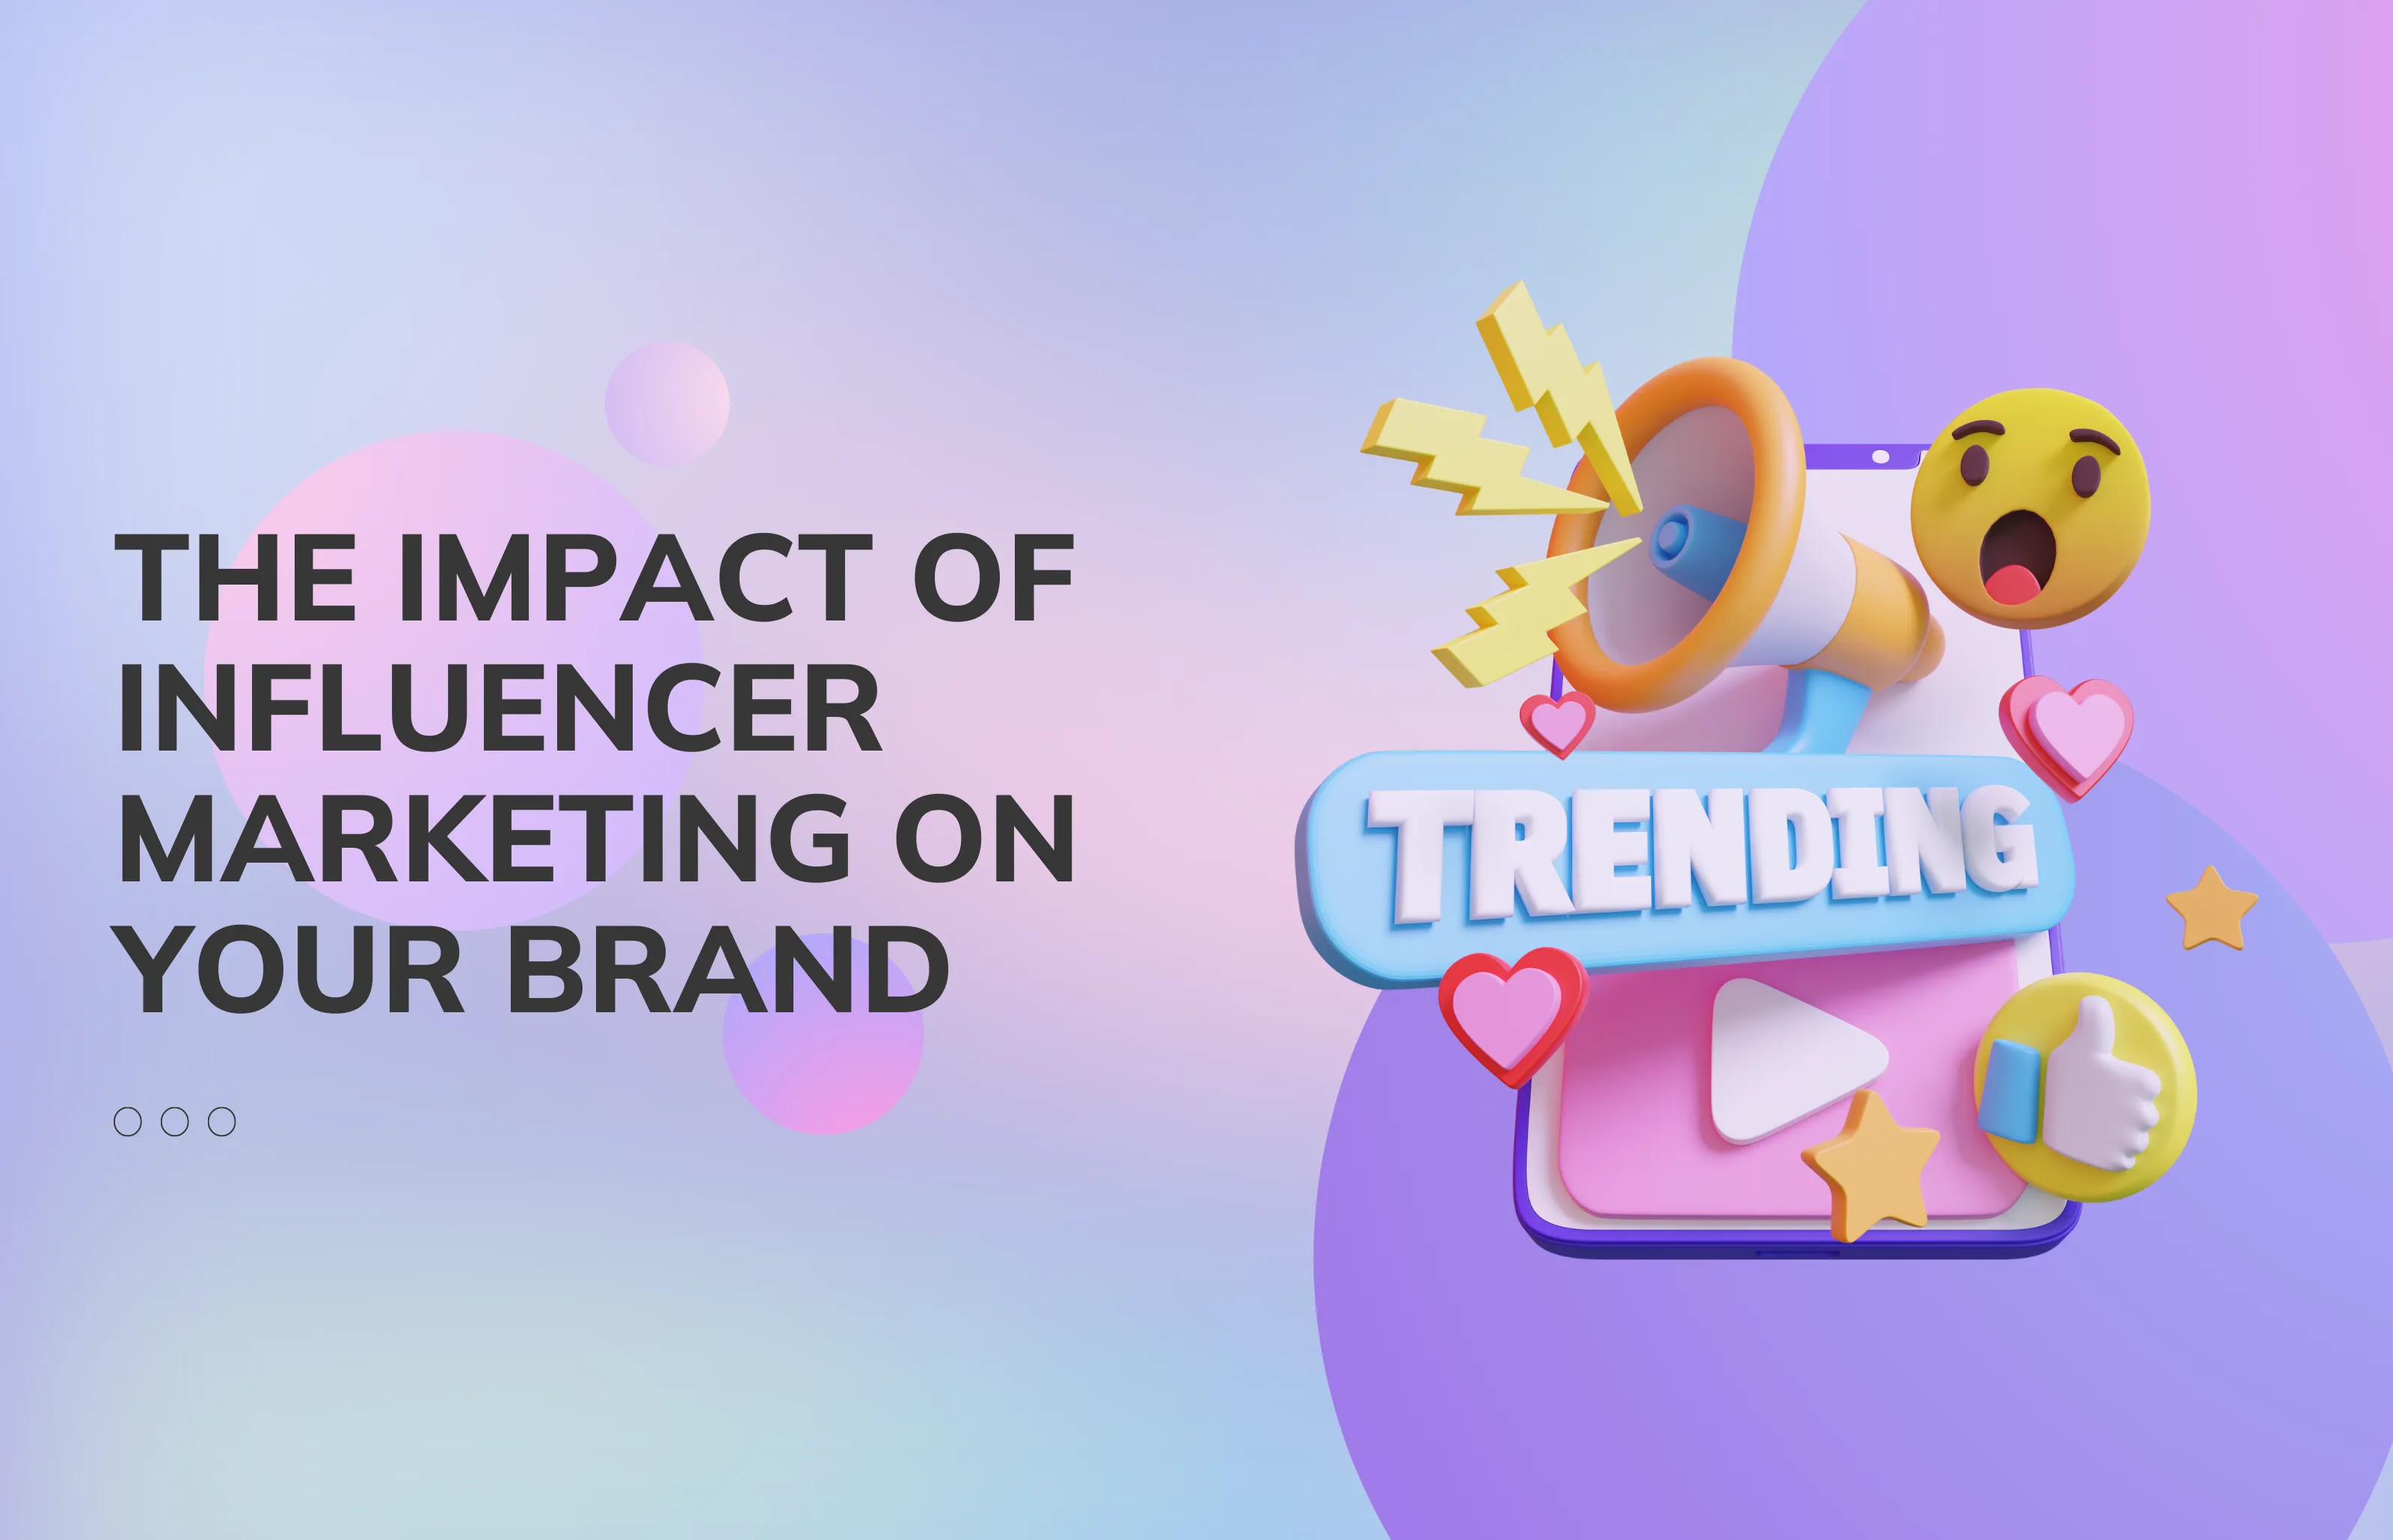  The Impact of Influencer Marketing on Your Brand